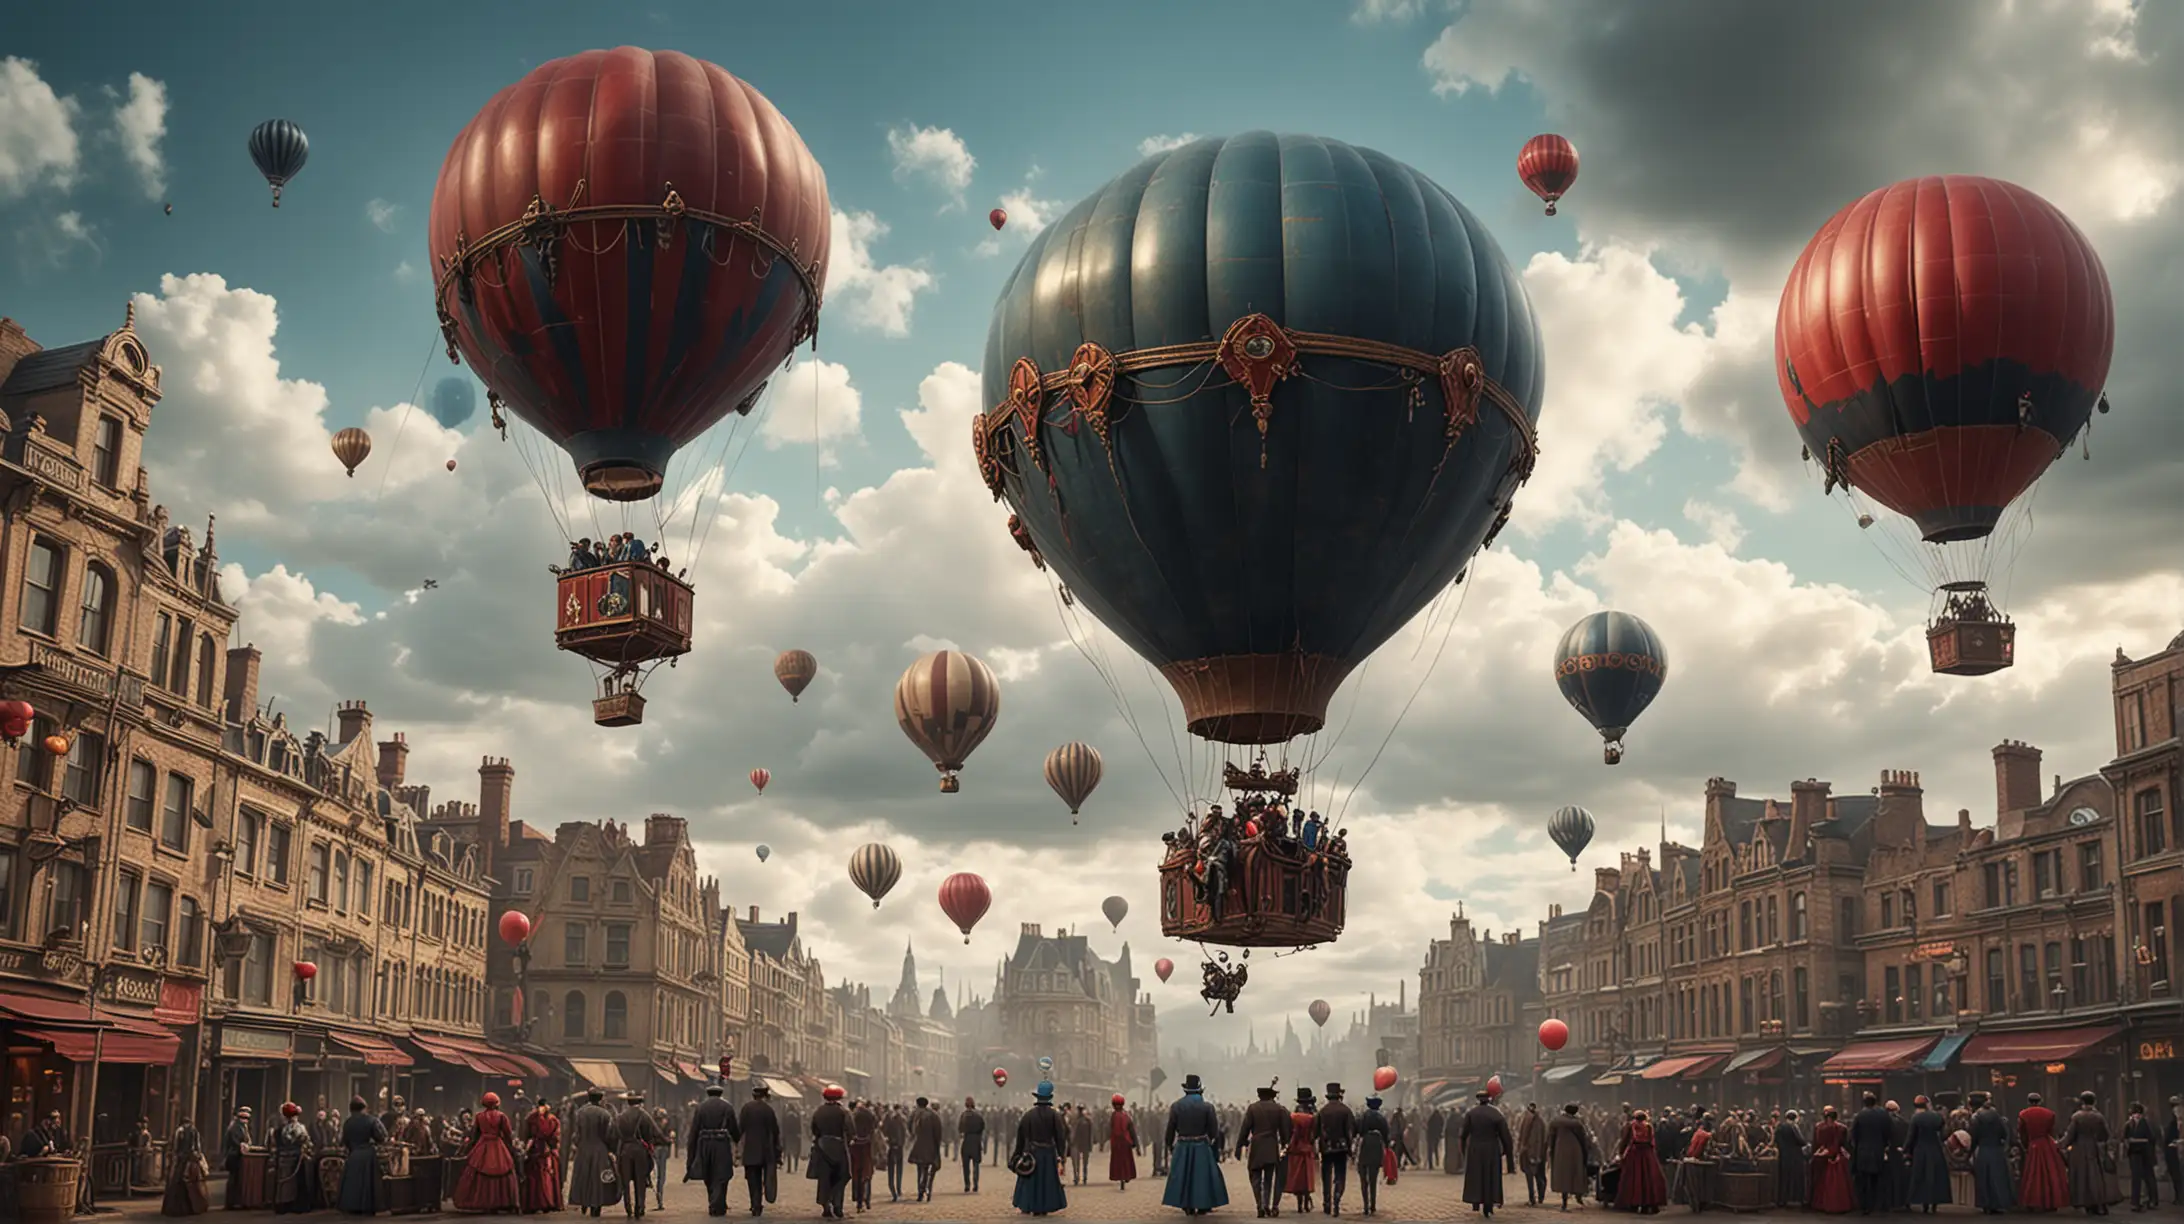 Steampunk Cityscape with Flying Air Balloon and Victorian Figures